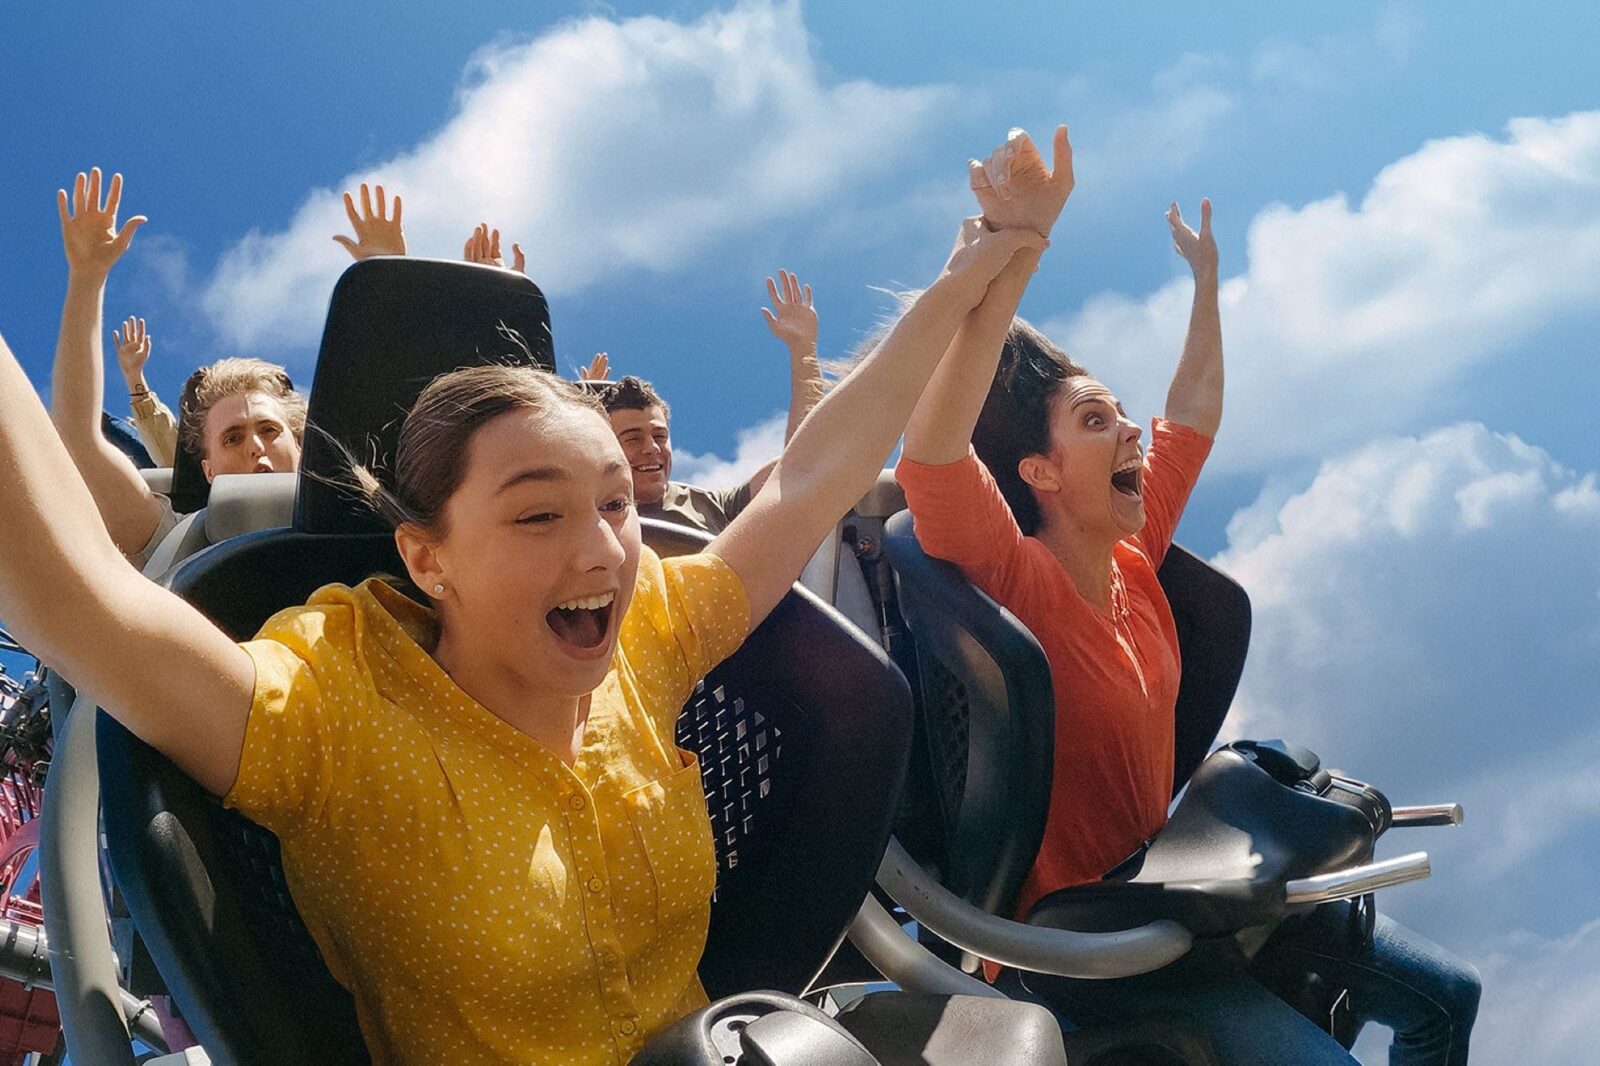 Ride the tallest, fastest HyperCoaster in the Southern Hemisphere